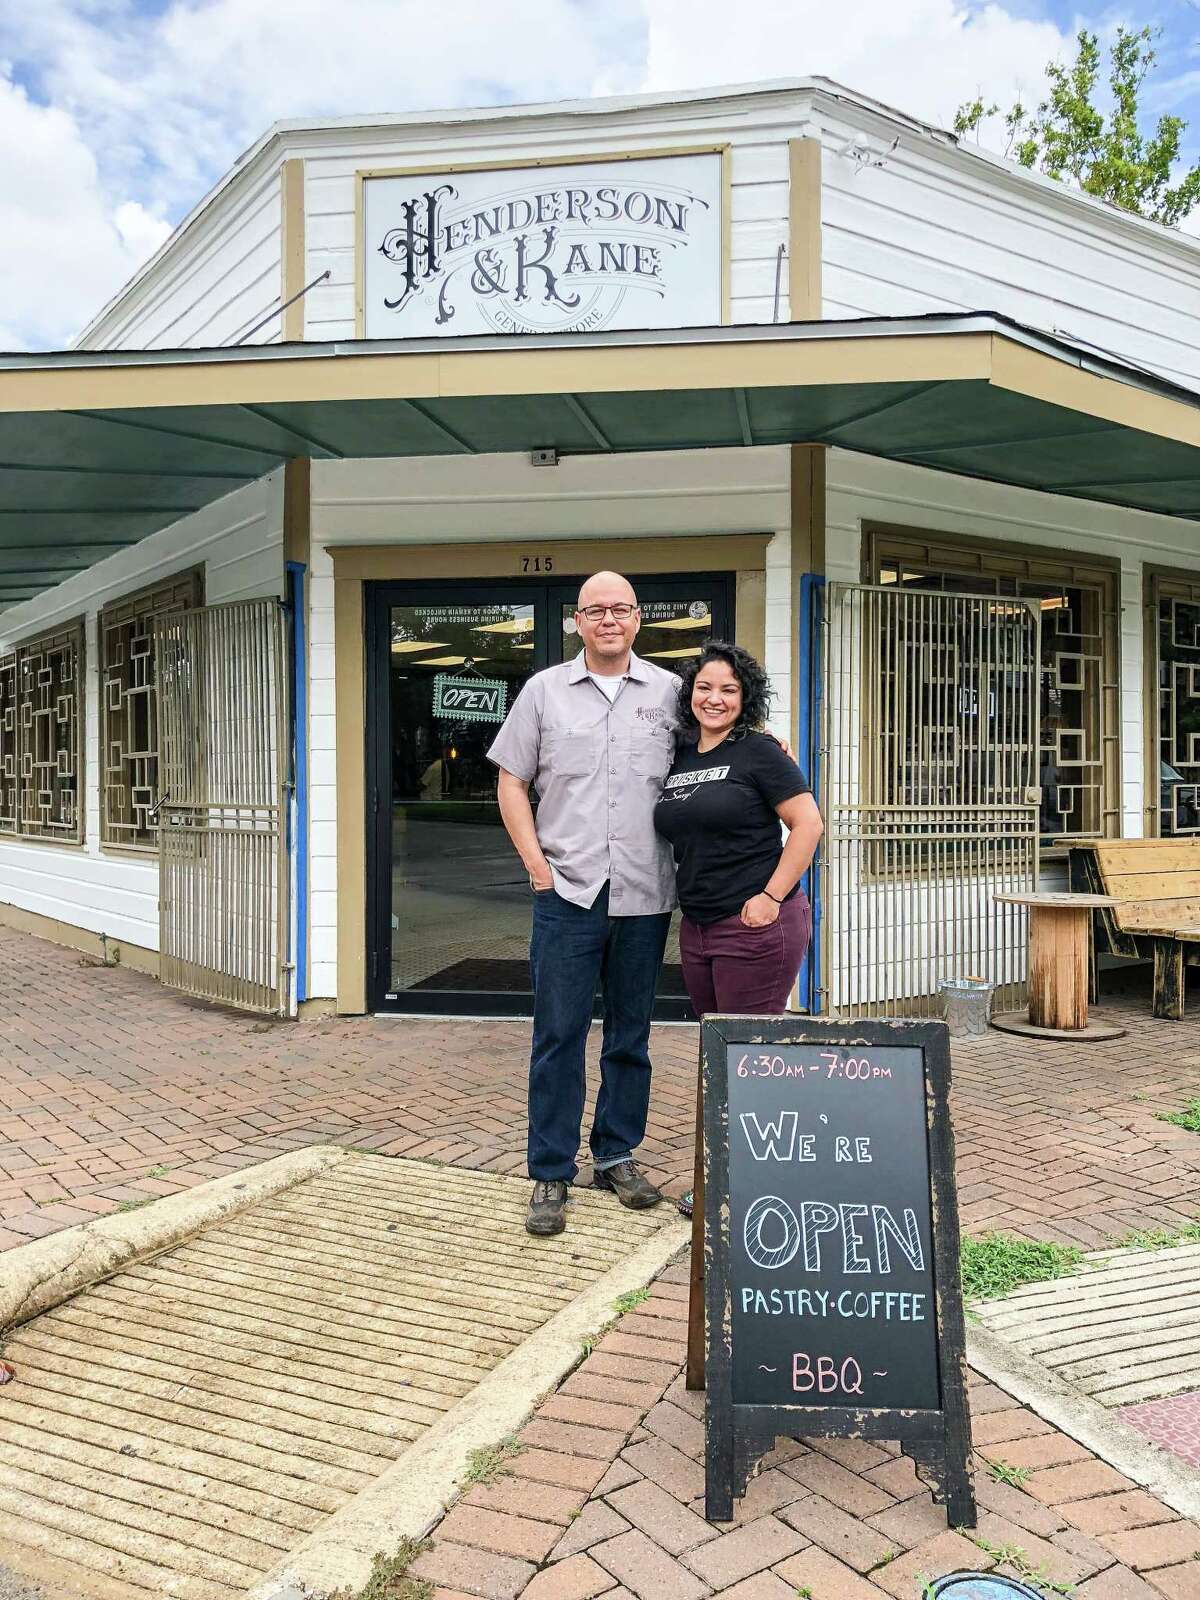 Henderson & Kane General Store is celebrating 713 Day all week long. In honor of the family owned, Old Sixth Ward shop's fourth year in business, the store is announcing a special daily deal on its social media accounts through Friday.